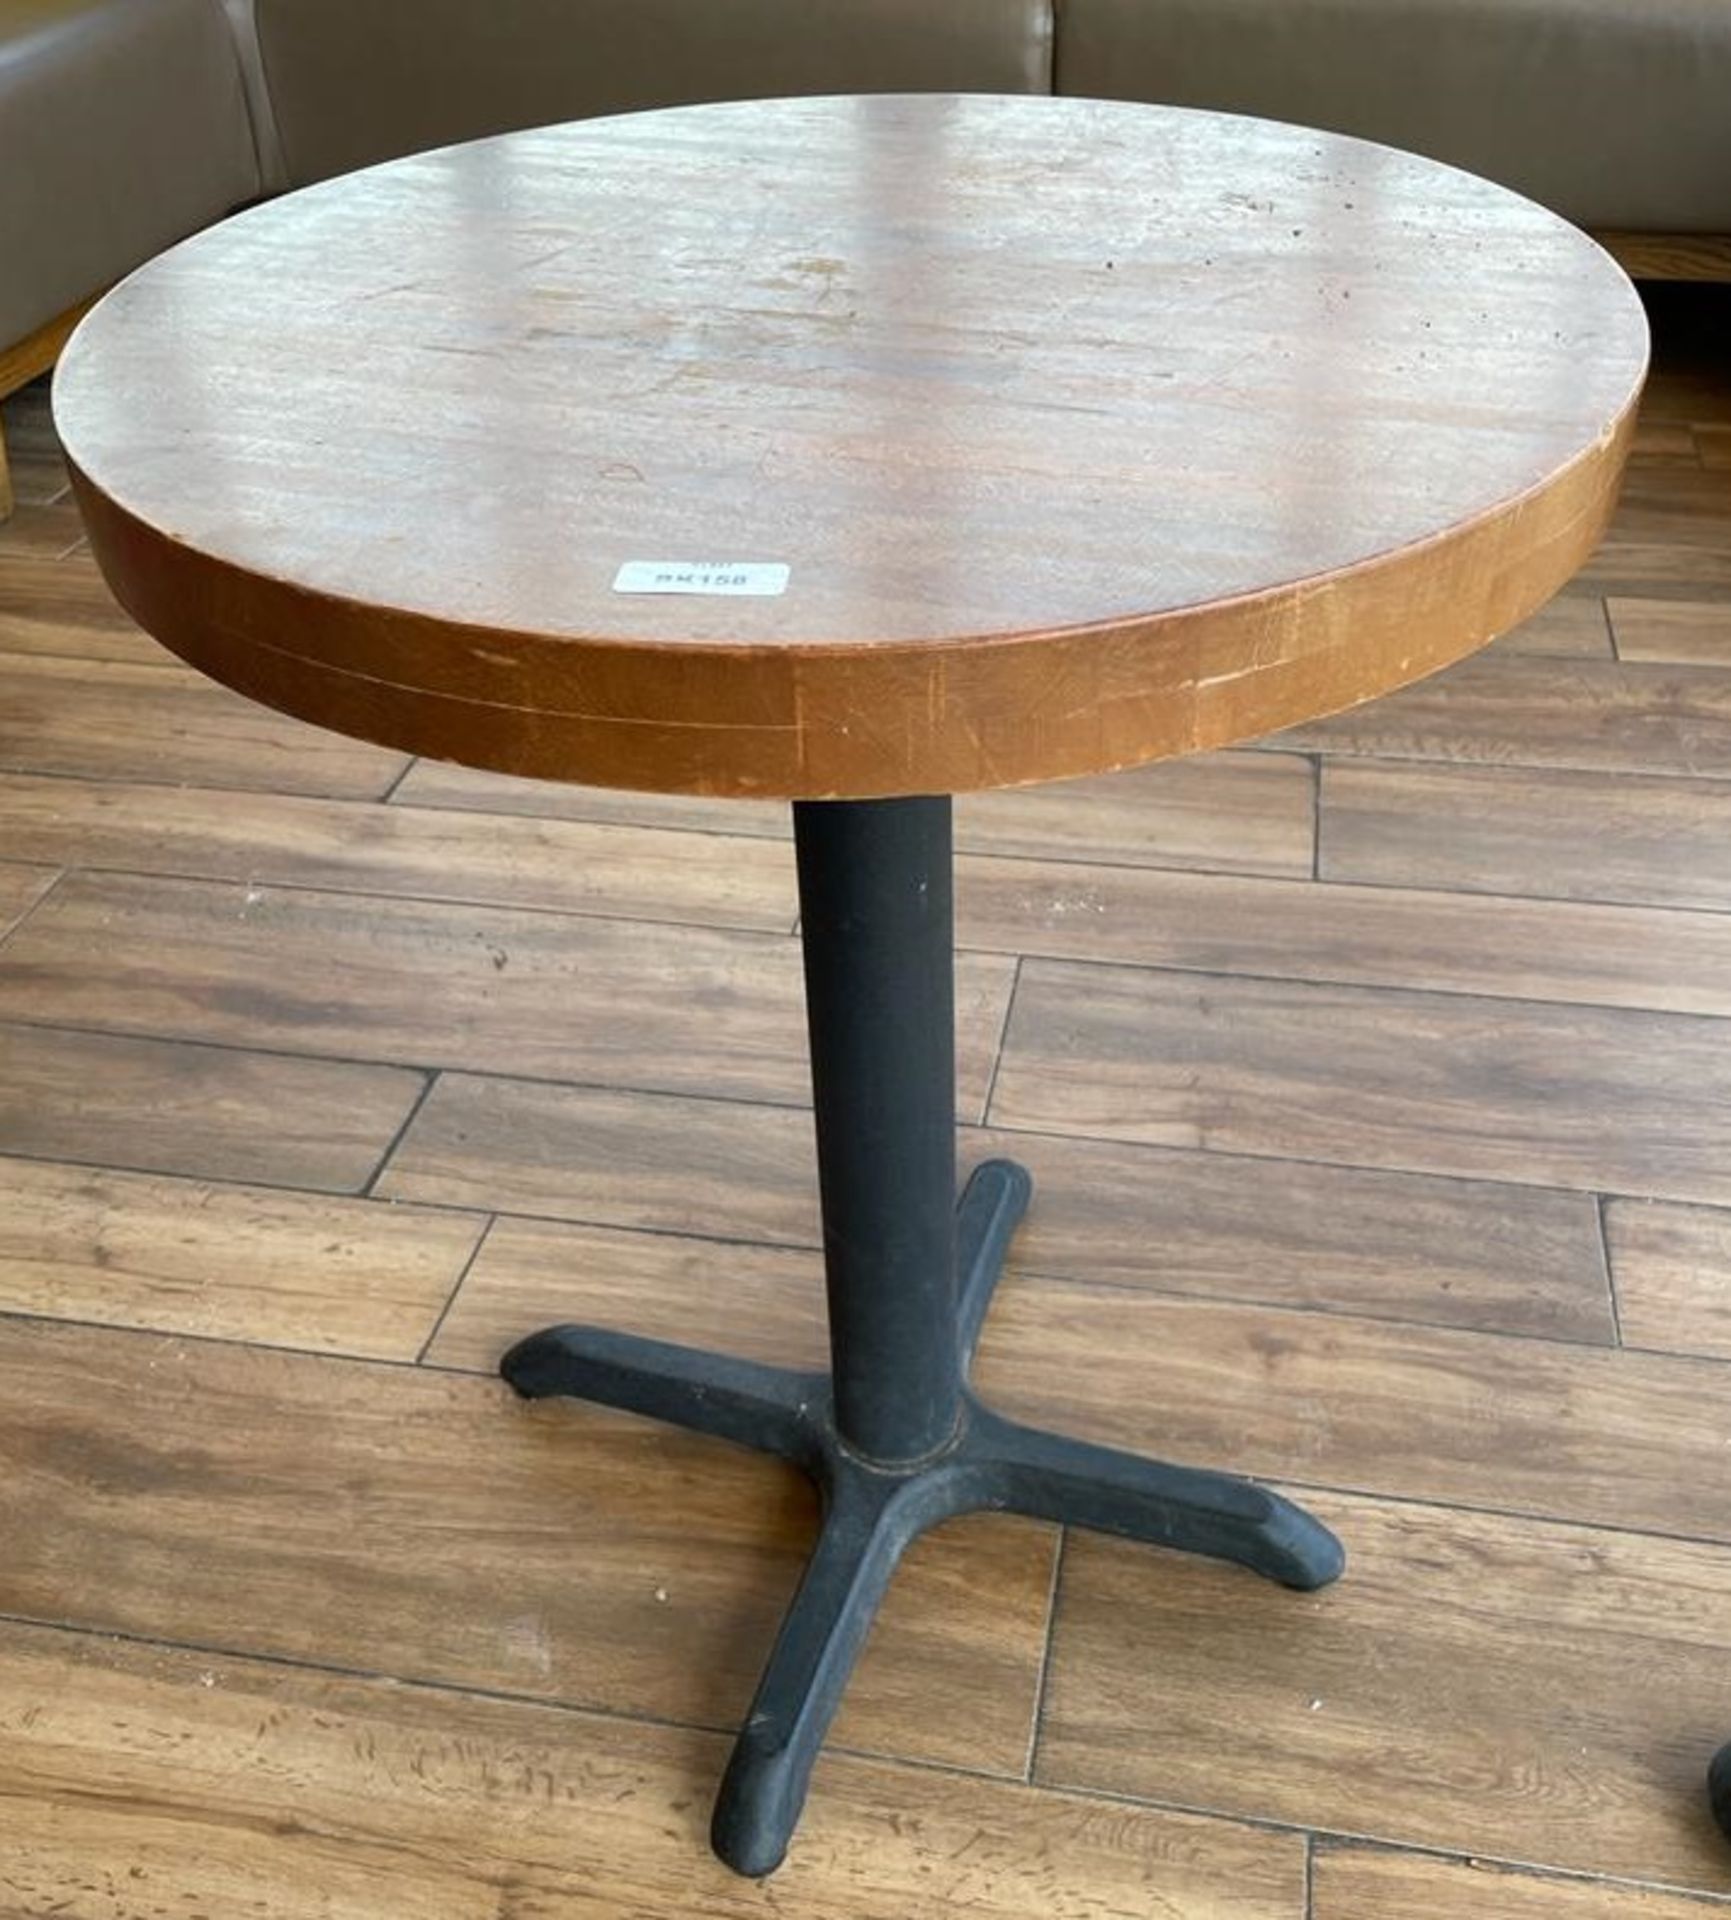 1 x Small Bar Table - Ref: BK158 - CL686 - Location: Altrincham WA14This lot was recently removed